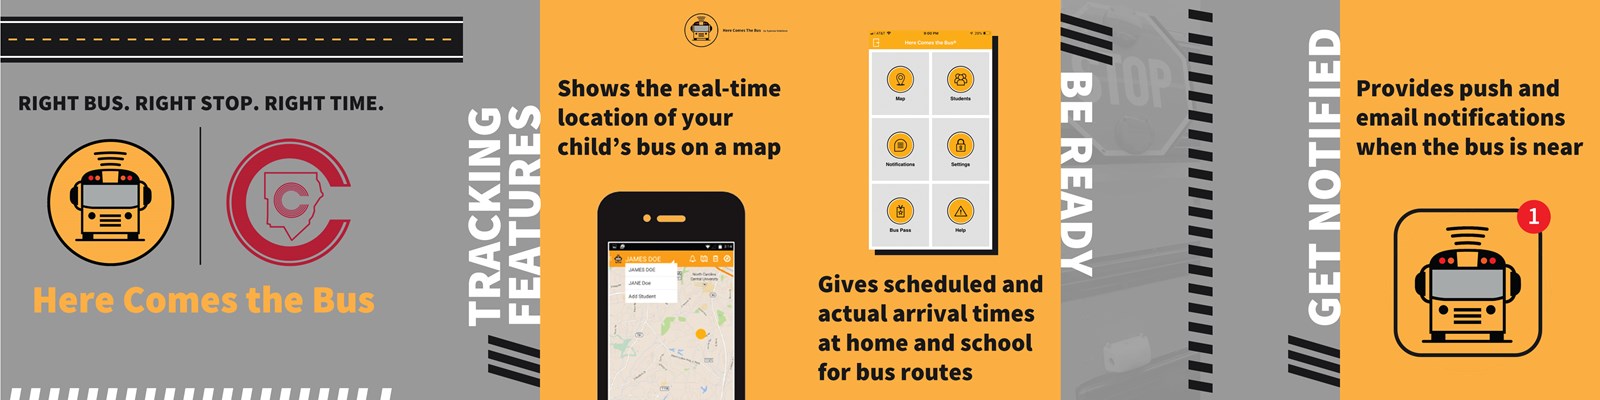 CCSD Here Come the Bus Tracking Features